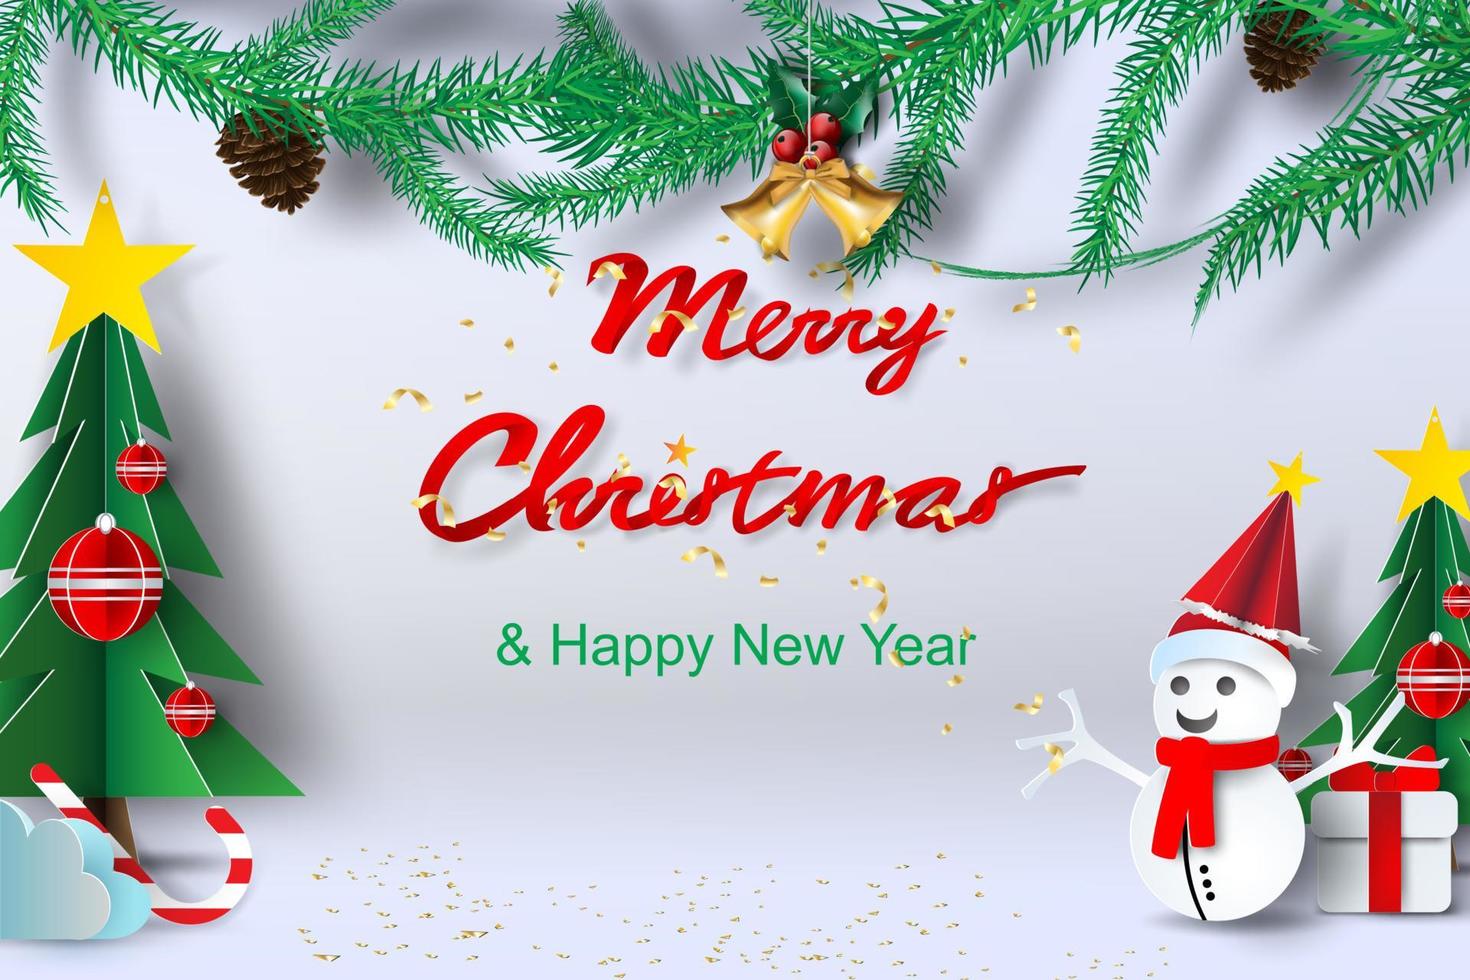 Paper art of Merry Christmas background vector